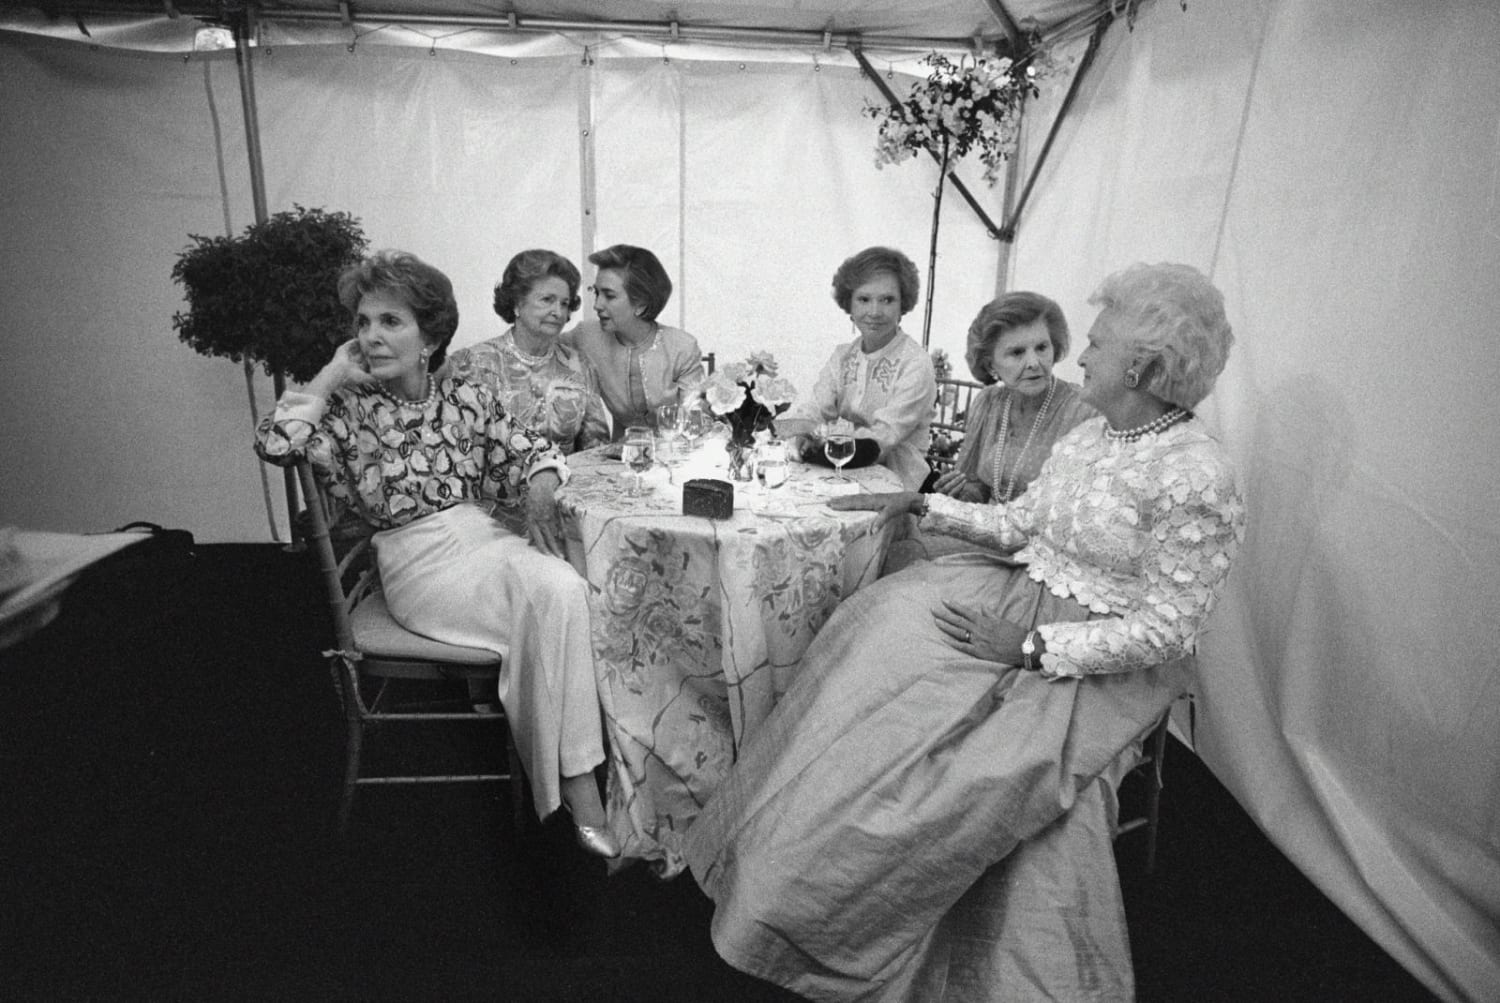 Nancy Reagan, Lady Bird Johnson, Hillary Clinton, Rosalynn Carter, Betty Ford, and Barbara Bush at the "National Garden Gala, A Tribute to America's First Ladies", May 11, 1994. Jacqueline Kennedy Onassis, absent due to illness, died a week after this photograph was taken.